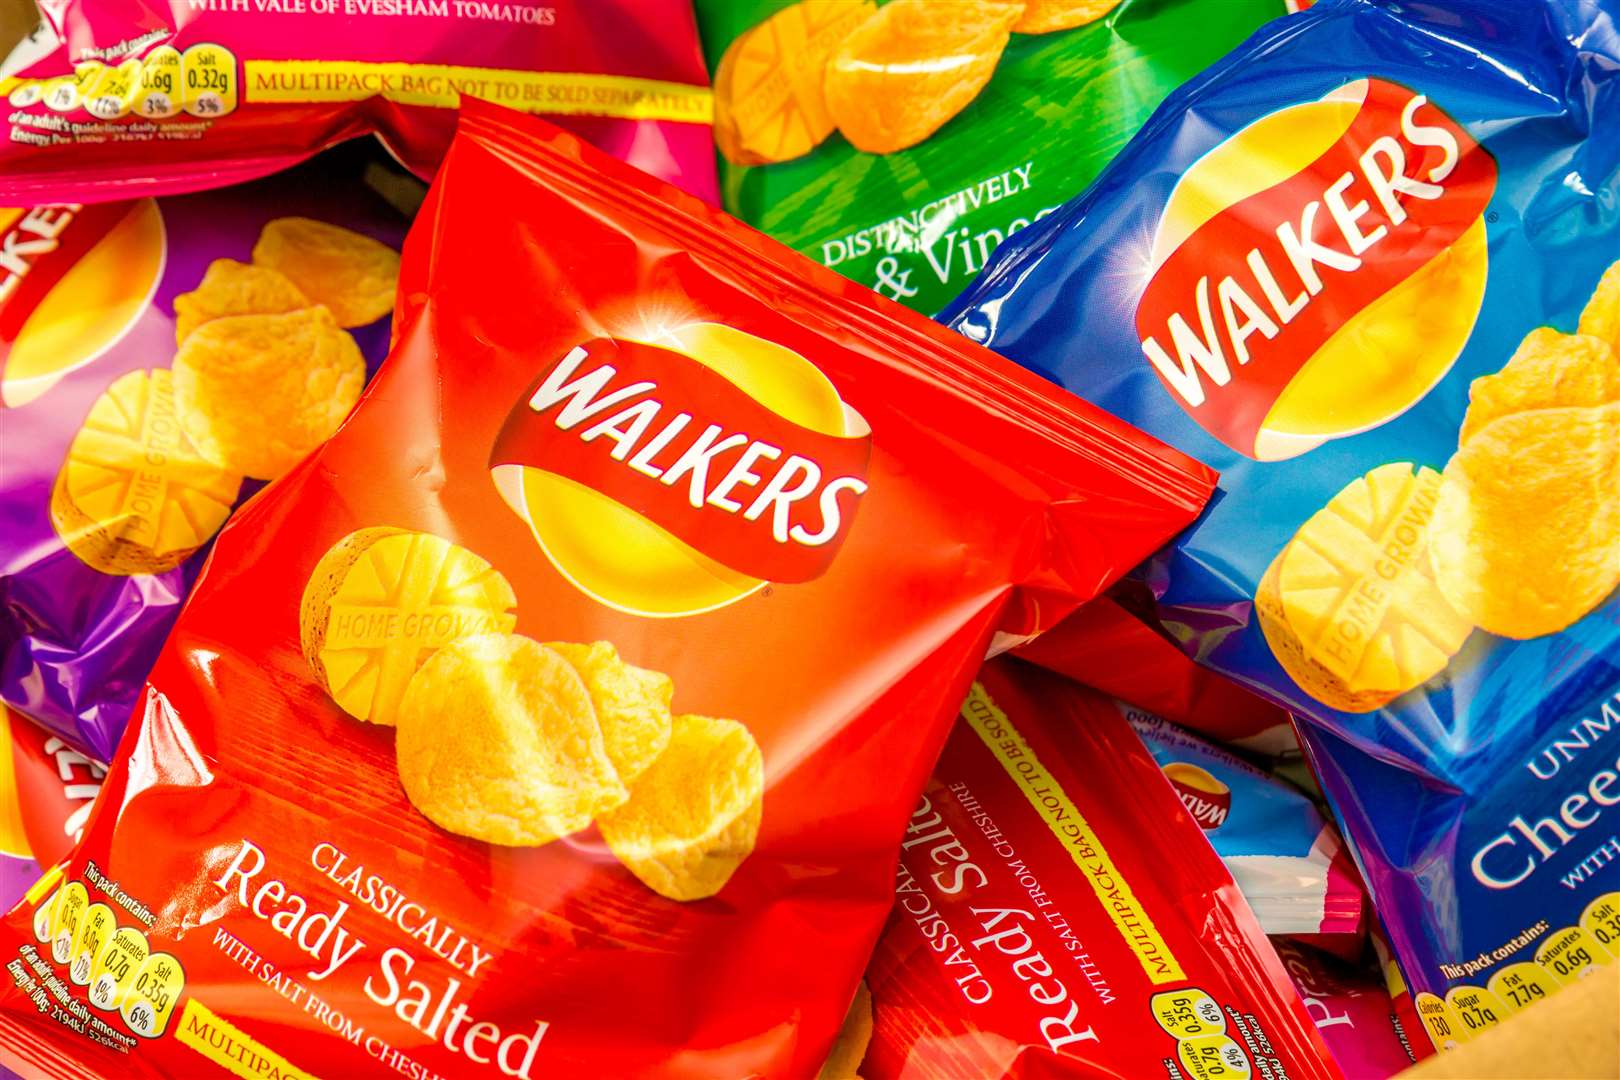 Walkers has confirmed it has discontinued one of its flavours. Image: Getty Images stock photo.